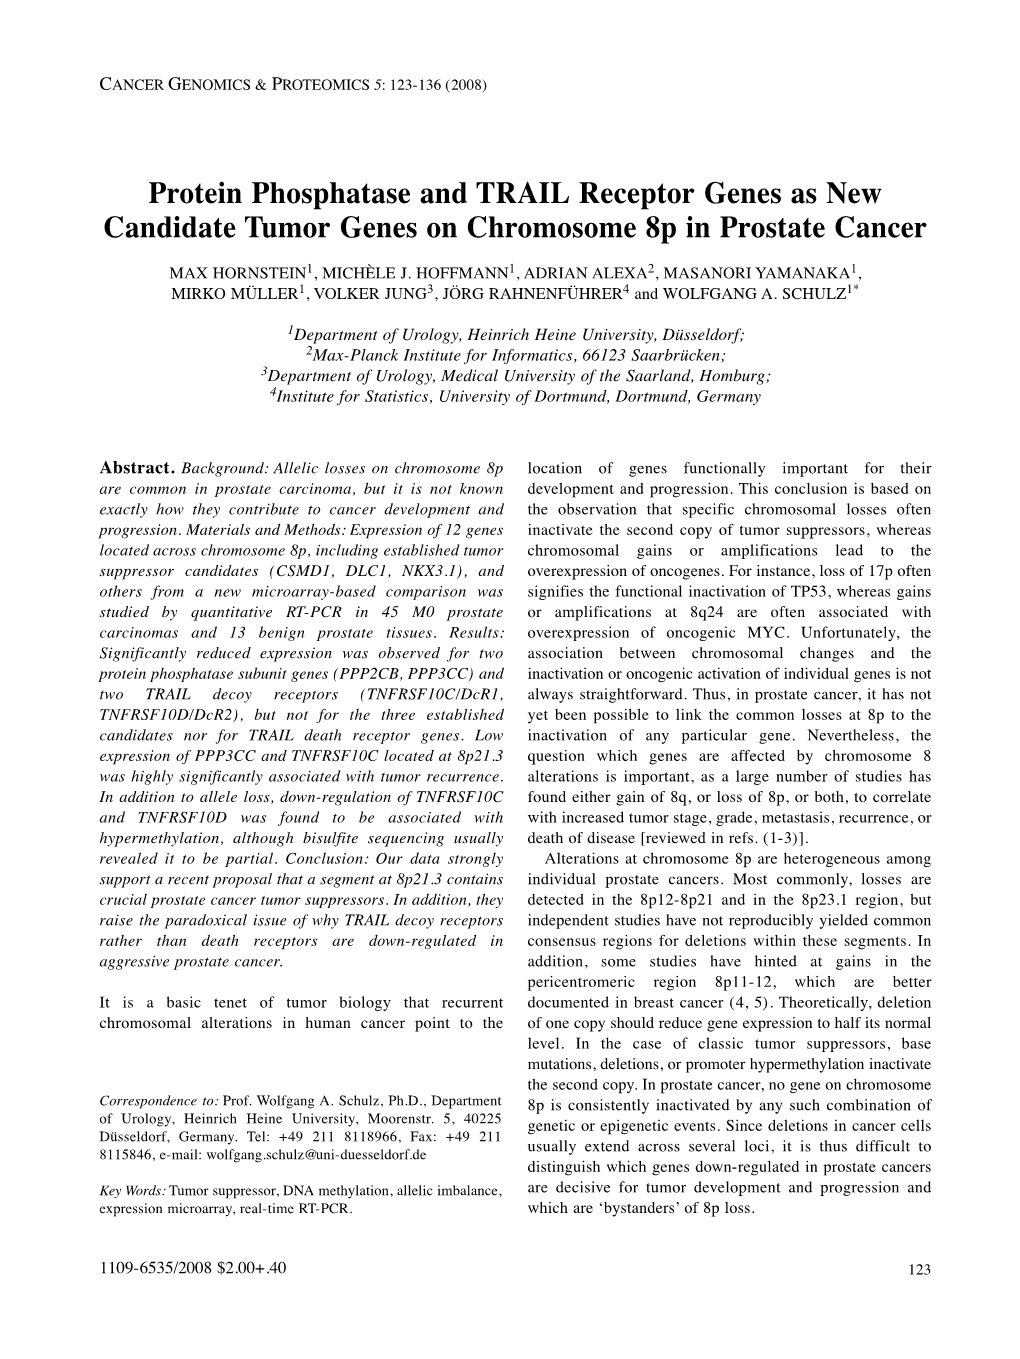 Protein Phosphatase and TRAIL Receptor Genes As New Candidate Tumor Genes on Chromosome 8P in Prostate Cancer MAX HORNSTEIN 1, MICHÈLE J